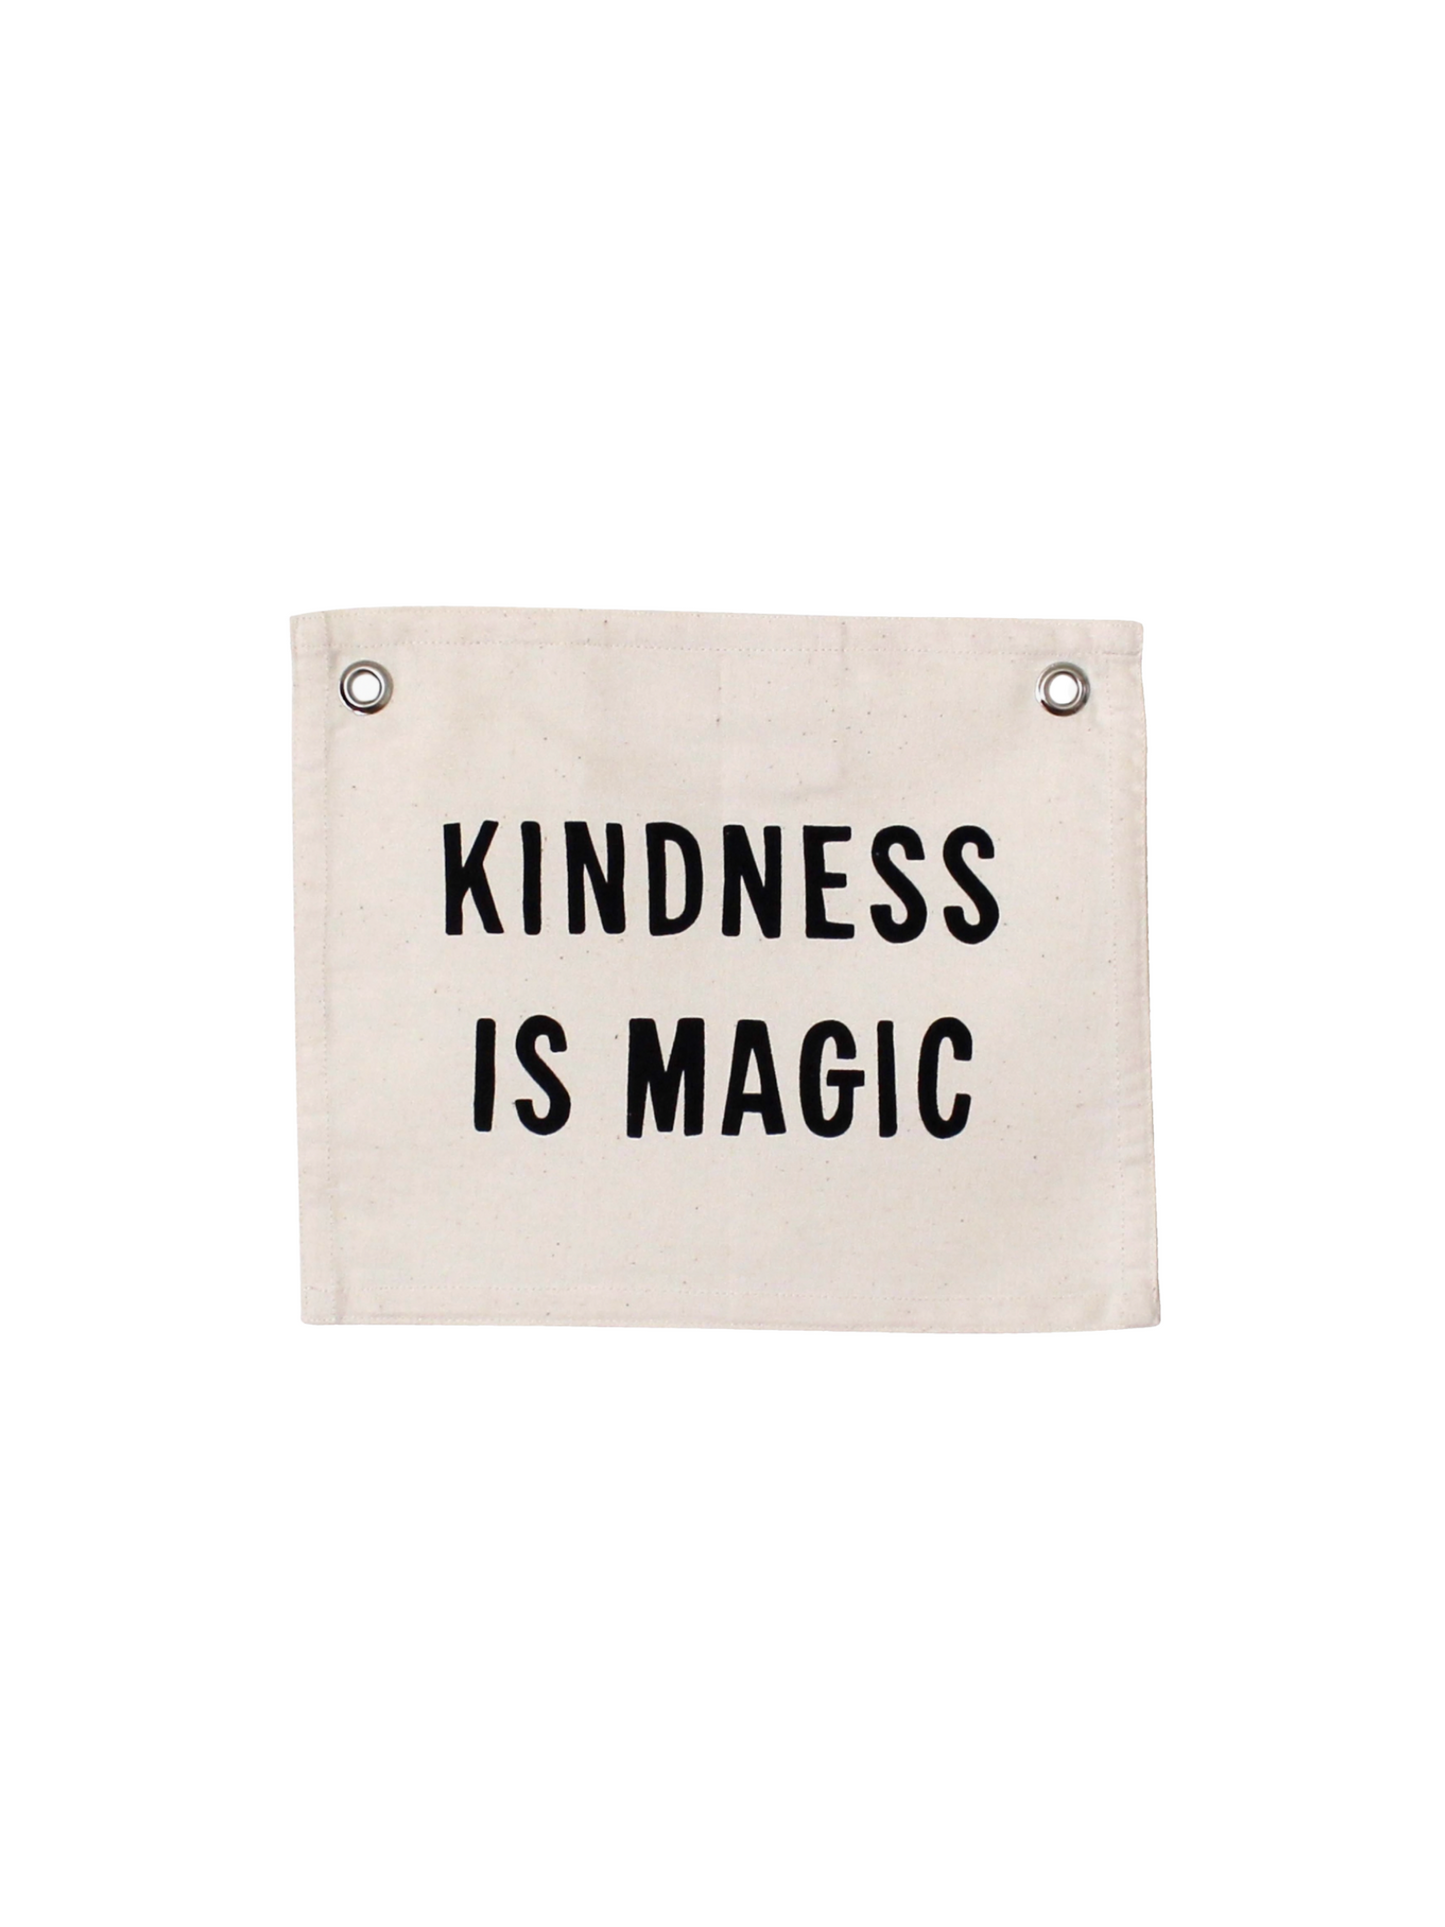 Kindness is Magic Banner